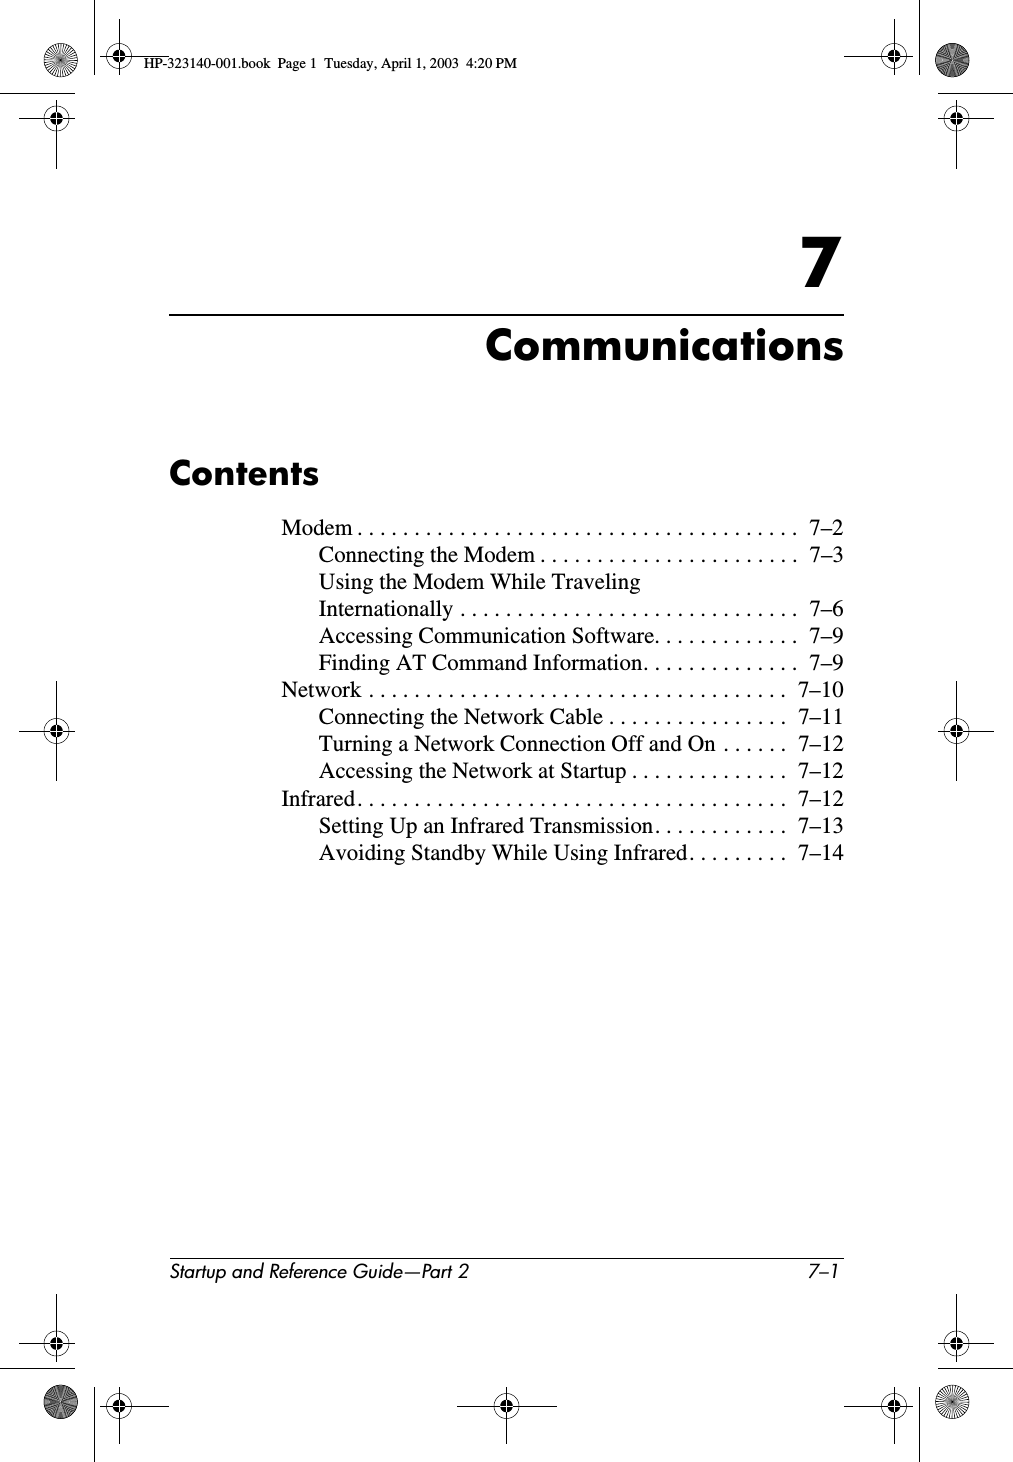 Startup and Reference Guide—Part 2 7–17CommunicationsContentsModem . . . . . . . . . . . . . . . . . . . . . . . . . . . . . . . . . . . . . . .  7–2Connecting the Modem . . . . . . . . . . . . . . . . . . . . . . .  7–3Using the Modem While Traveling Internationally . . . . . . . . . . . . . . . . . . . . . . . . . . . . . .  7–6Accessing Communication Software. . . . . . . . . . . . .  7–9Finding AT Command Information. . . . . . . . . . . . . .  7–9Network . . . . . . . . . . . . . . . . . . . . . . . . . . . . . . . . . . . . .  7–10Connecting the Network Cable . . . . . . . . . . . . . . . .  7–11Turning a Network Connection Off and On . . . . . .  7–12Accessing the Network at Startup . . . . . . . . . . . . . .  7–12Infrared. . . . . . . . . . . . . . . . . . . . . . . . . . . . . . . . . . . . . .  7–12Setting Up an Infrared Transmission. . . . . . . . . . . .  7–13Avoiding Standby While Using Infrared. . . . . . . . .  7–14HP-323140-001.book  Page 1  Tuesday, April 1, 2003  4:20 PM